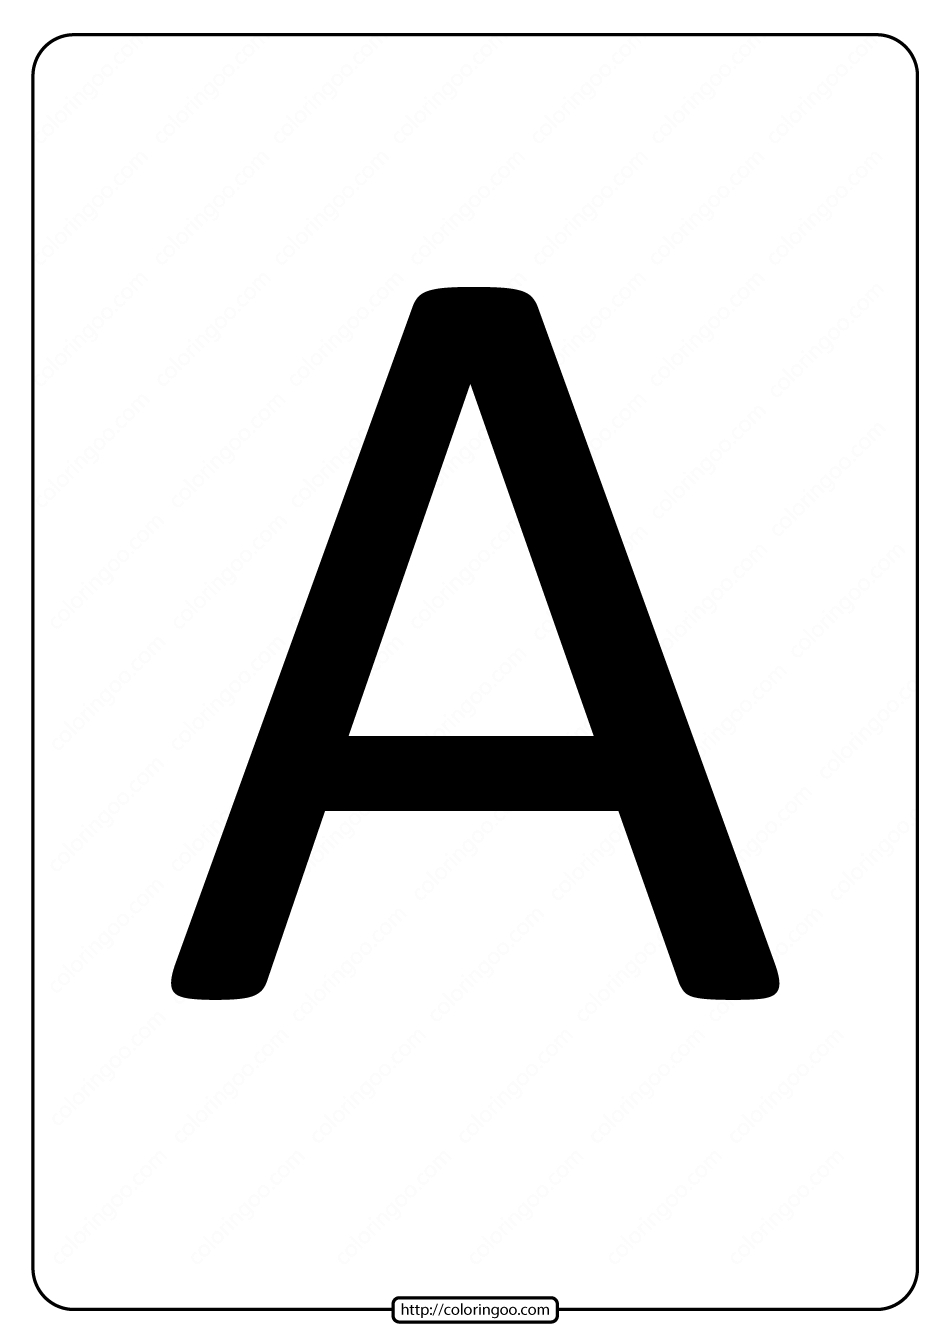 Printable A4 Size Uppercase Letters A Worksheet | Free Printable - Free Printable A4 Letters Of The Alphabet